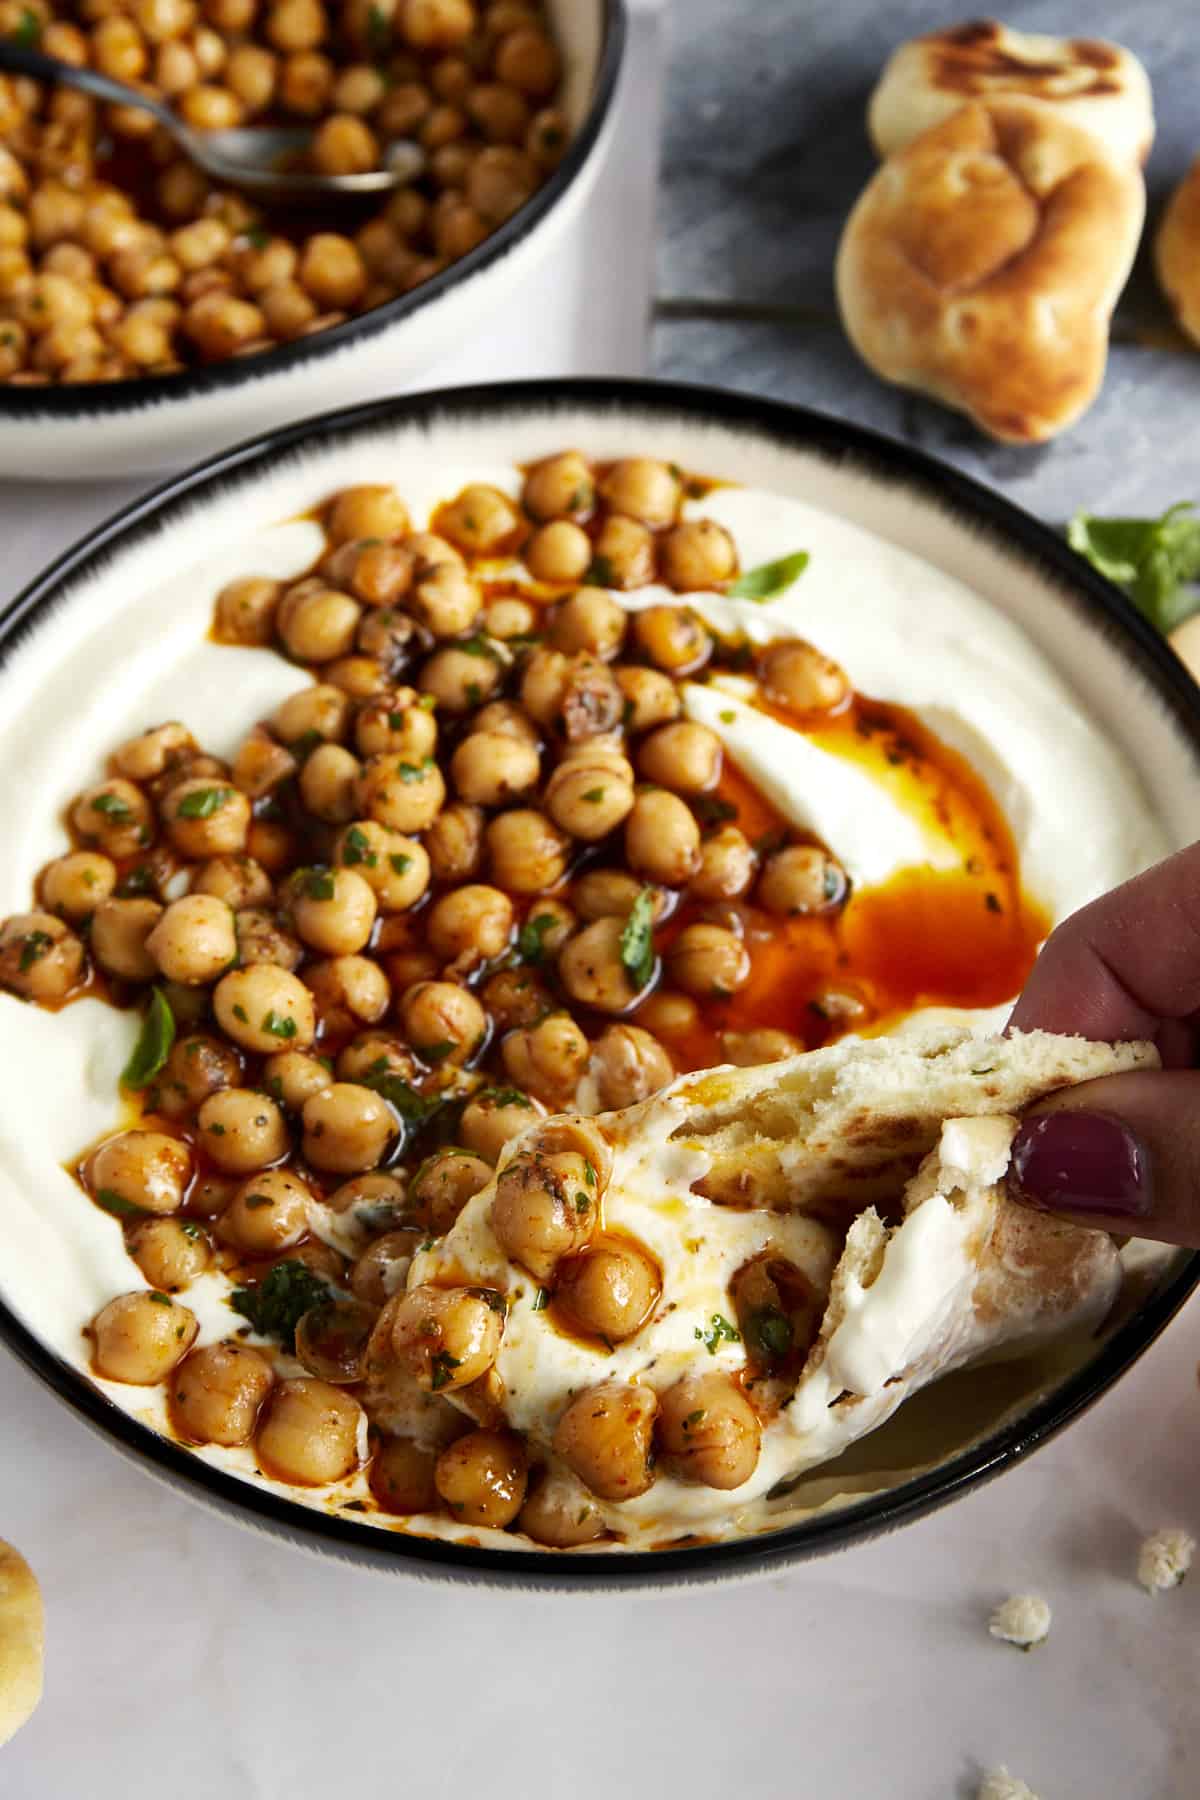 Pita bread being dipped into a bowl of whipped feta topped with marinated chickpeas. 